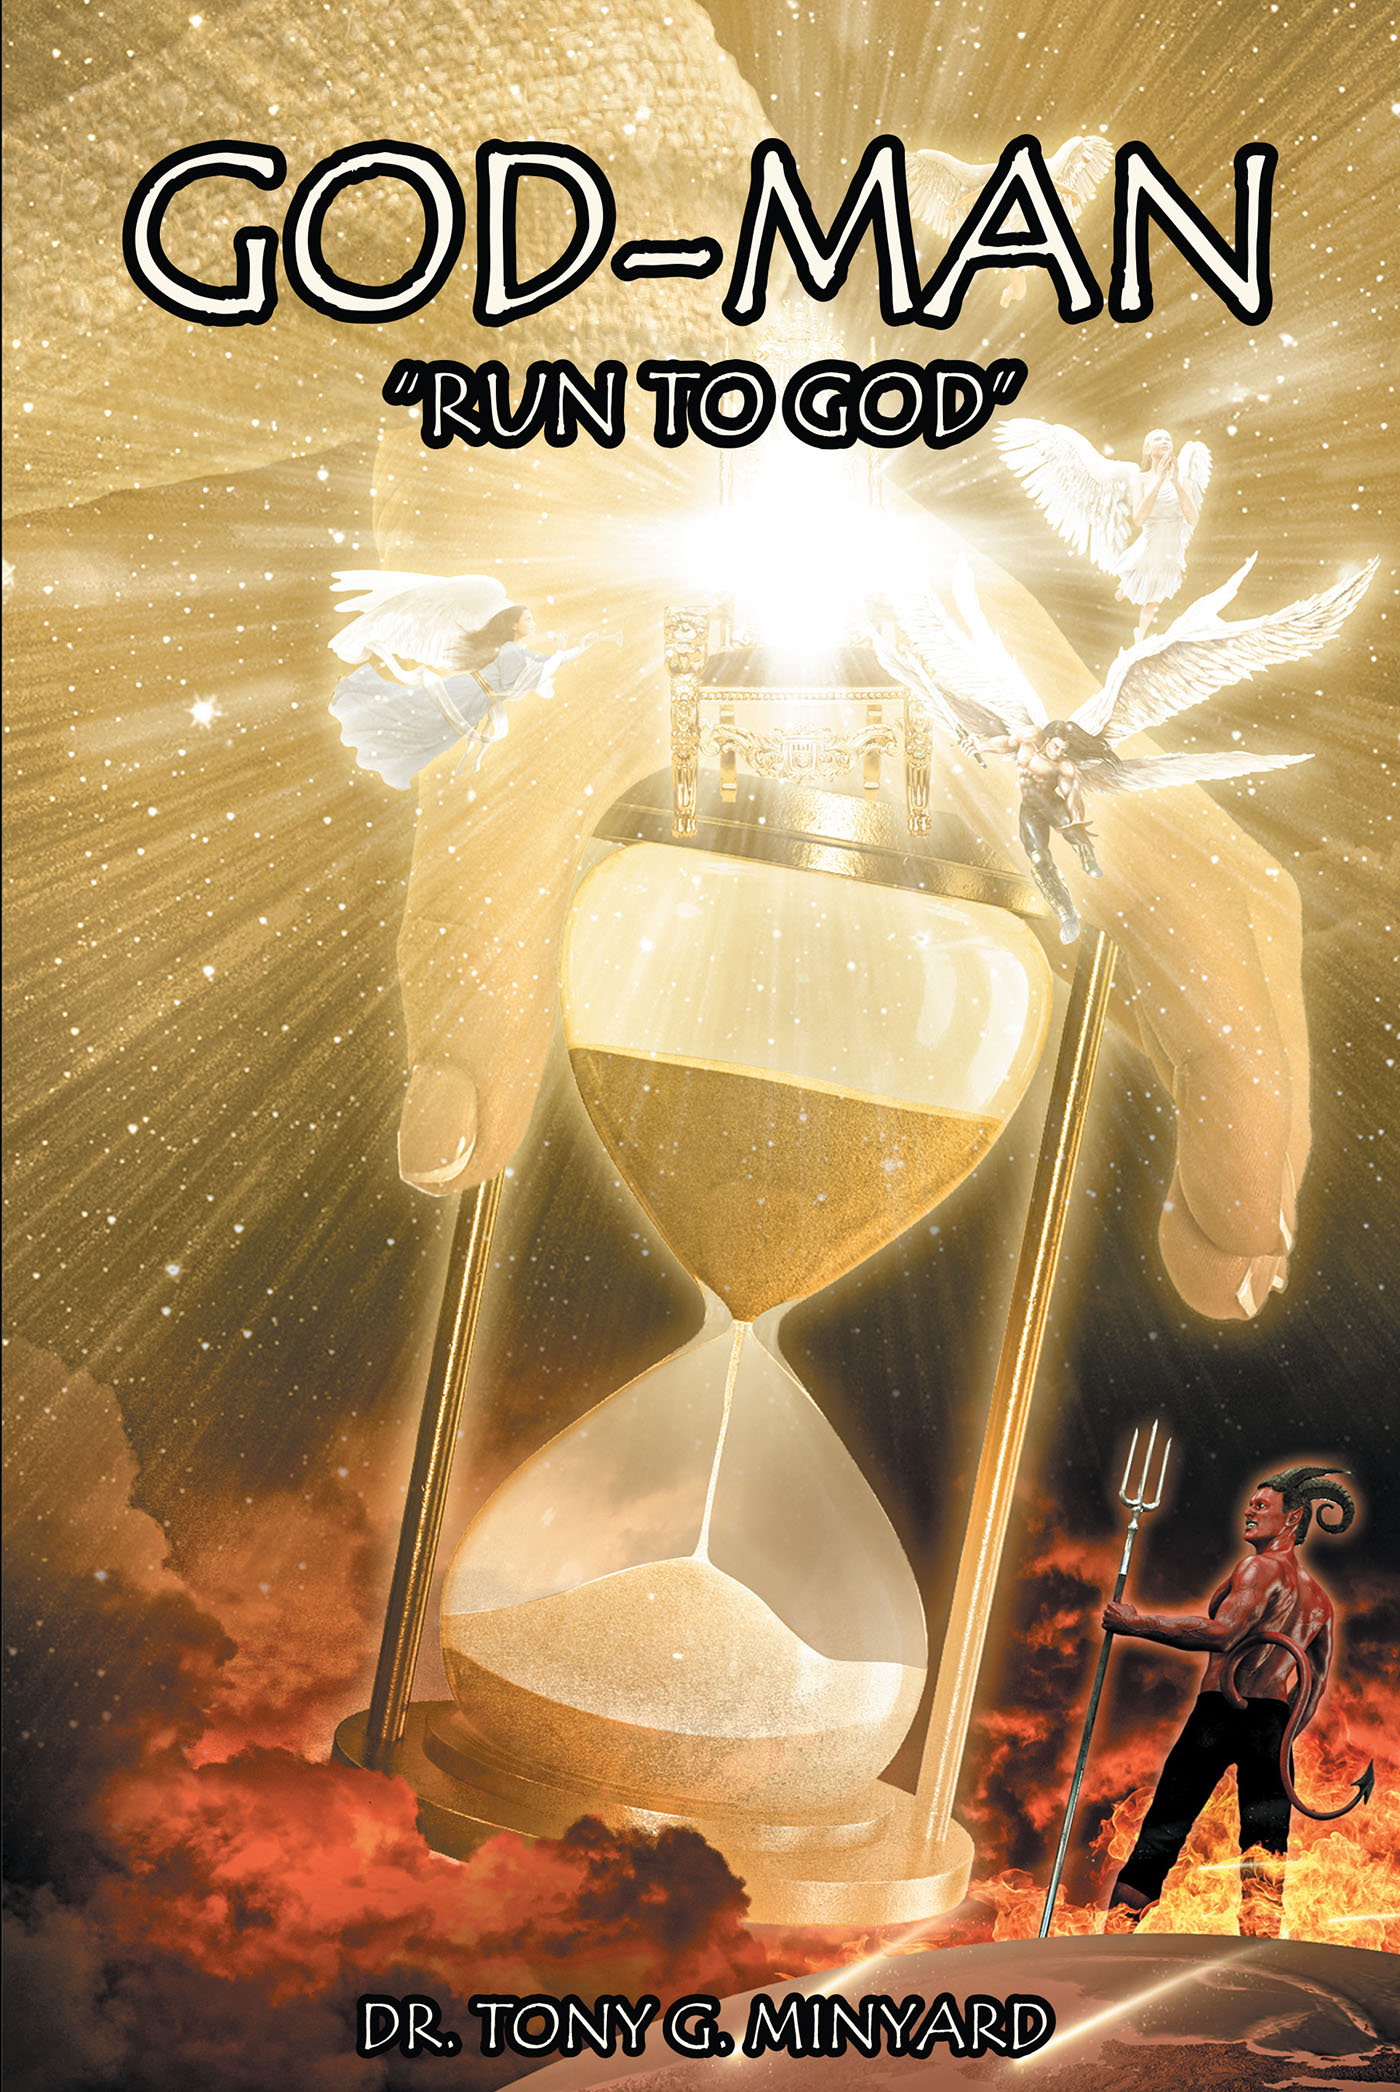 Dr. Tony G. Minyard’s New Book, "God-Man Run to God," Encourages All Readers to Reach Out to God in Their Times of Need to Receive His Love